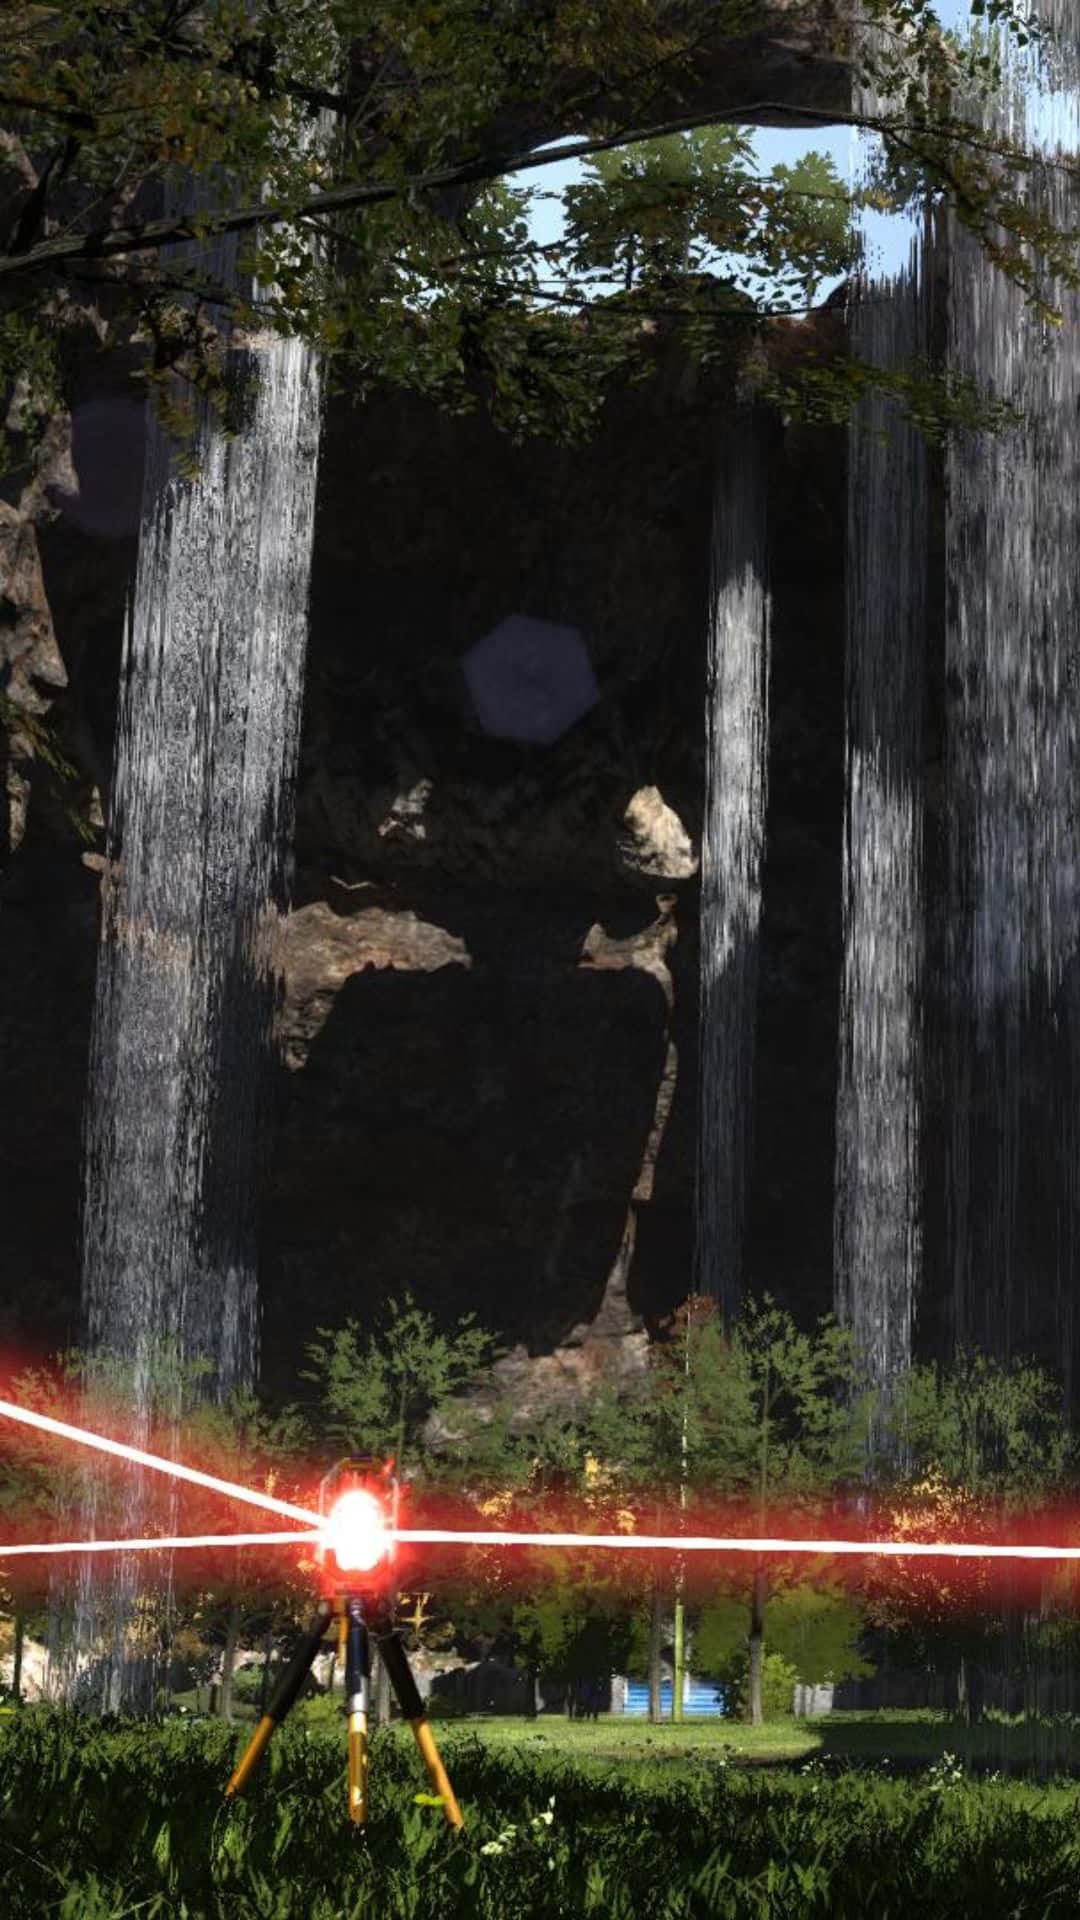 A Video Game With A Laser In Front Of A Waterfall